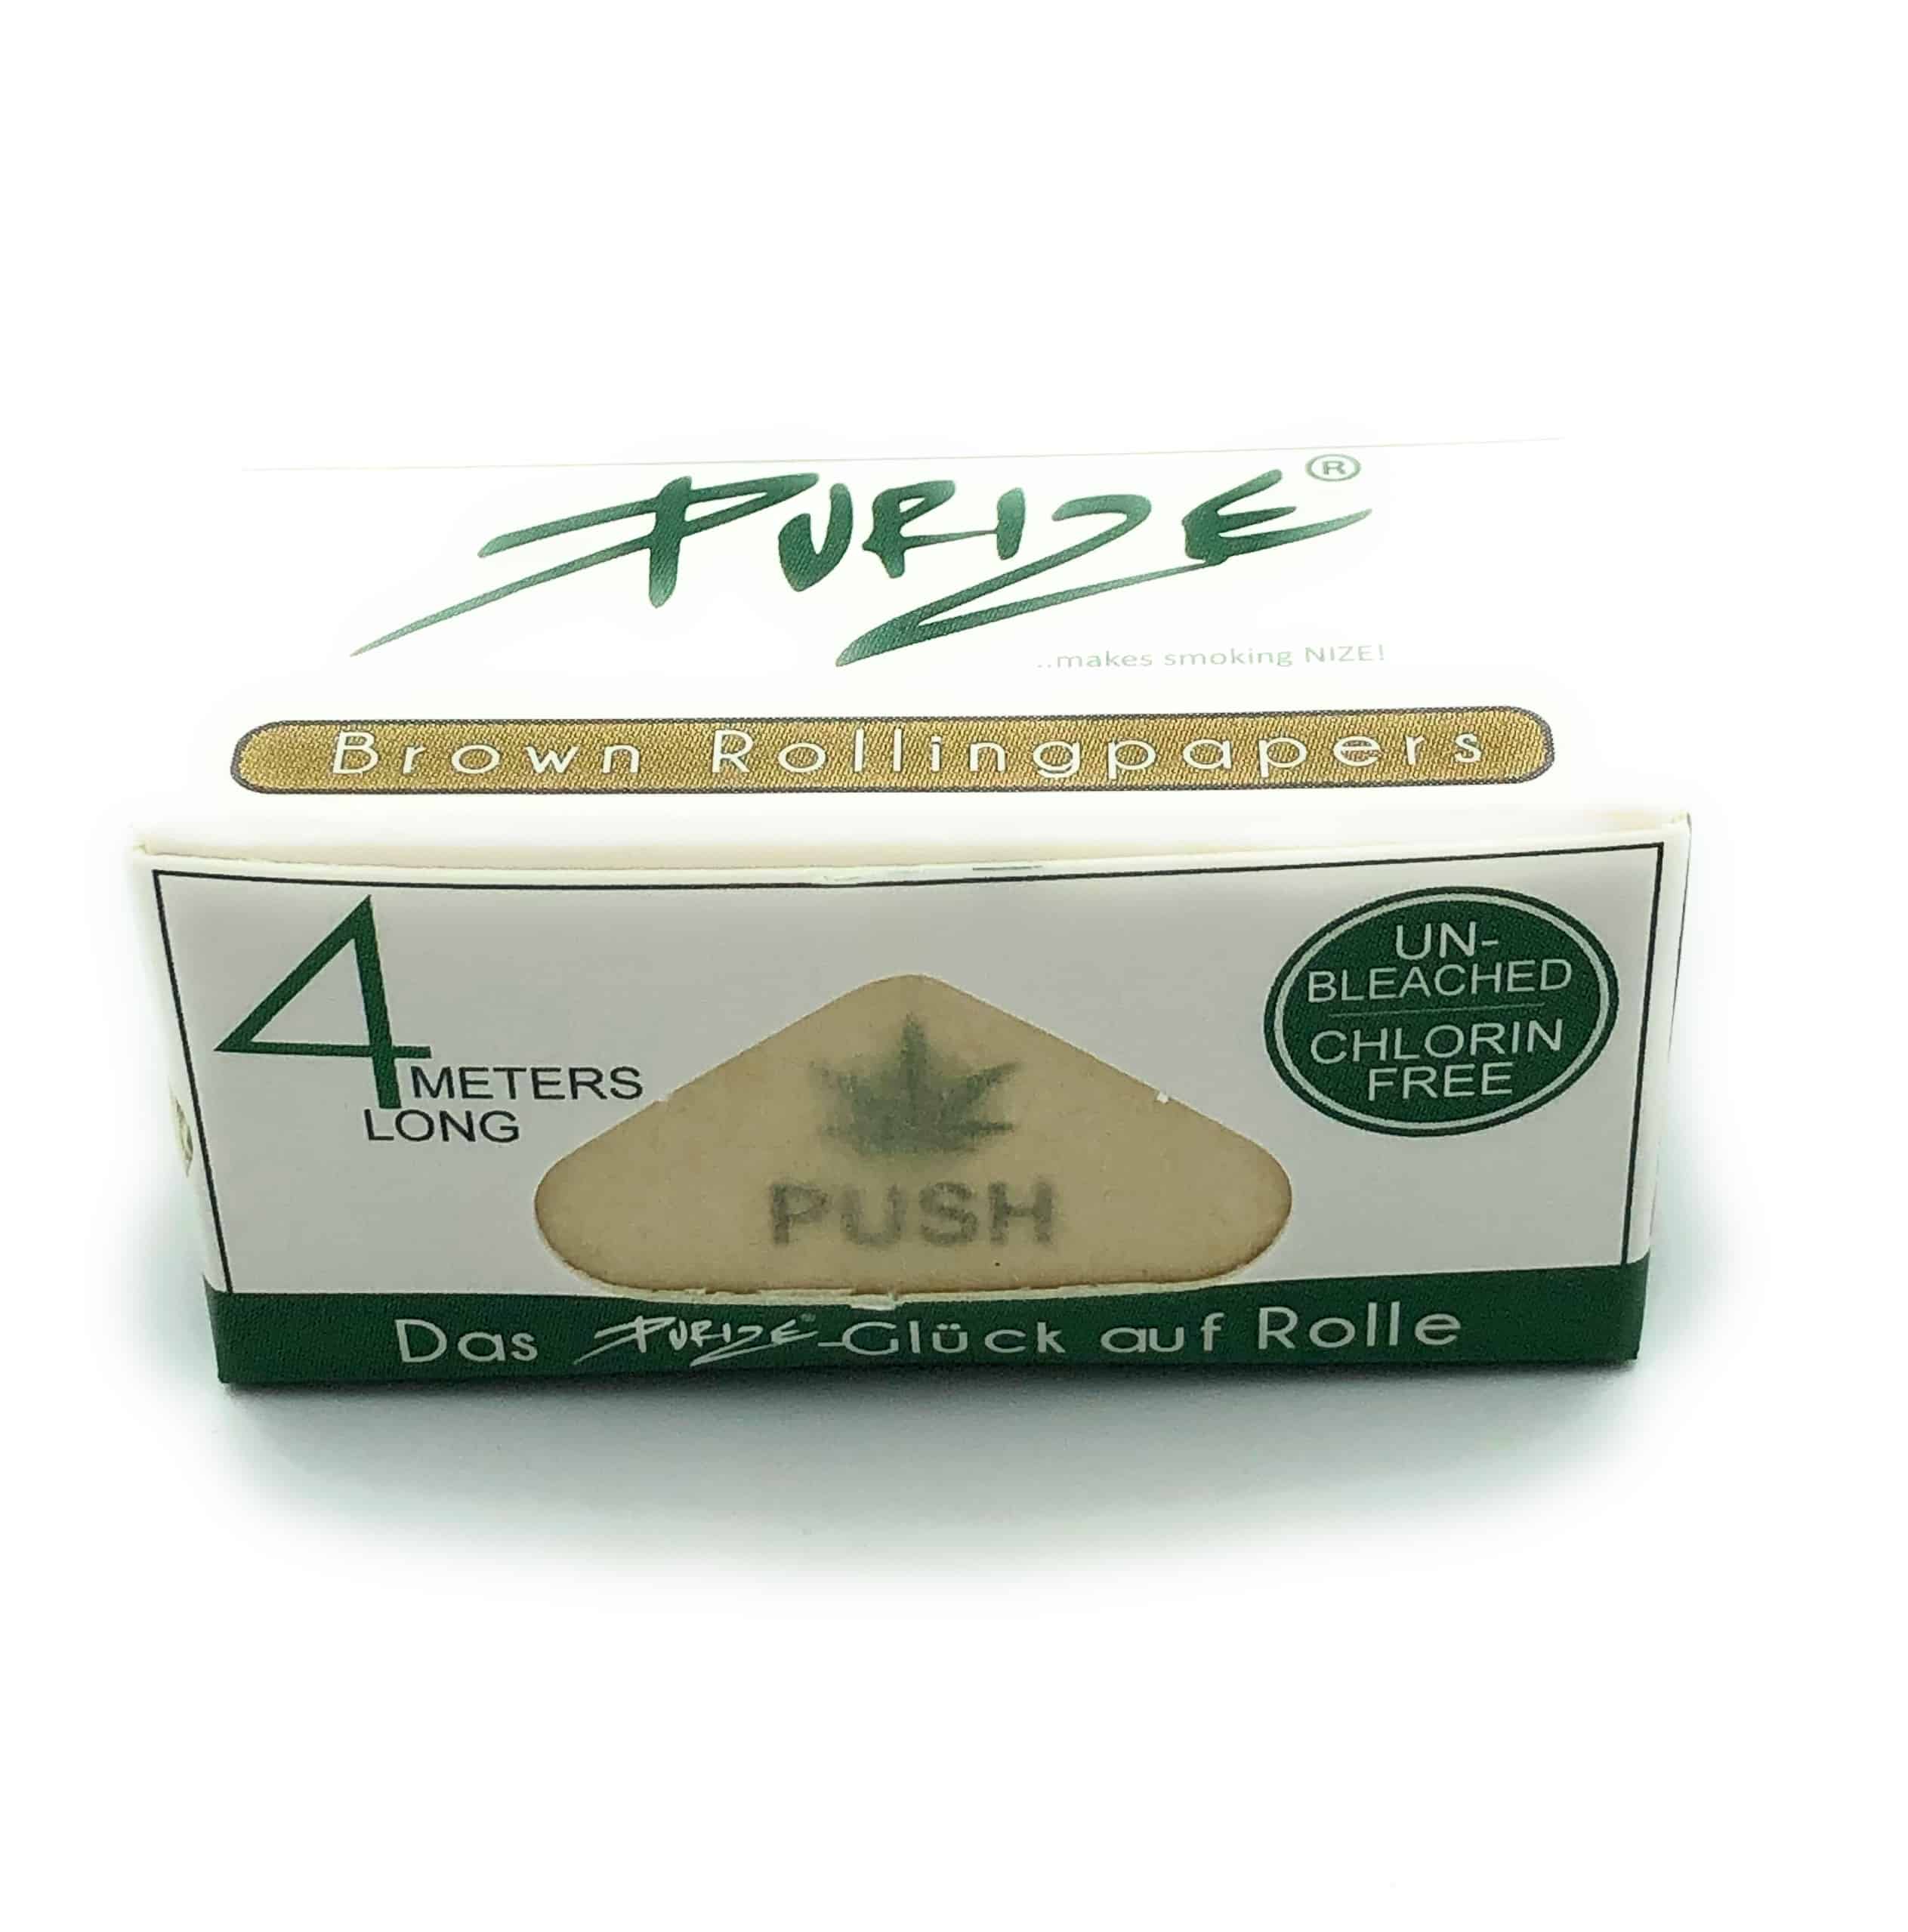 PURIZE Brown Rolls 4m ultrathin unbleached rollingpapers